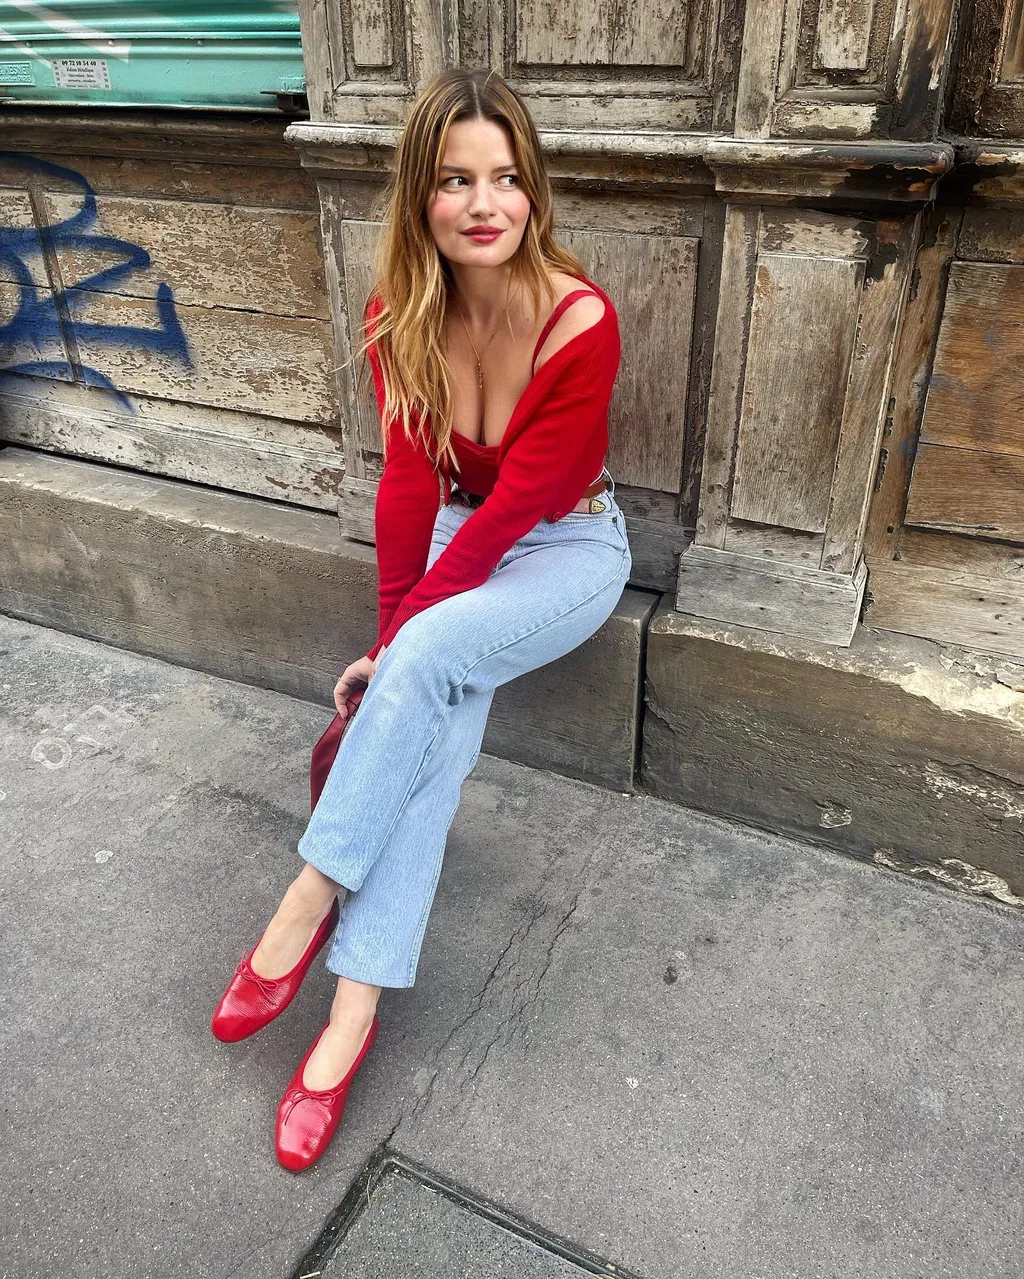 Red Top + Light-Wash Jeans + Red Ballet Flats